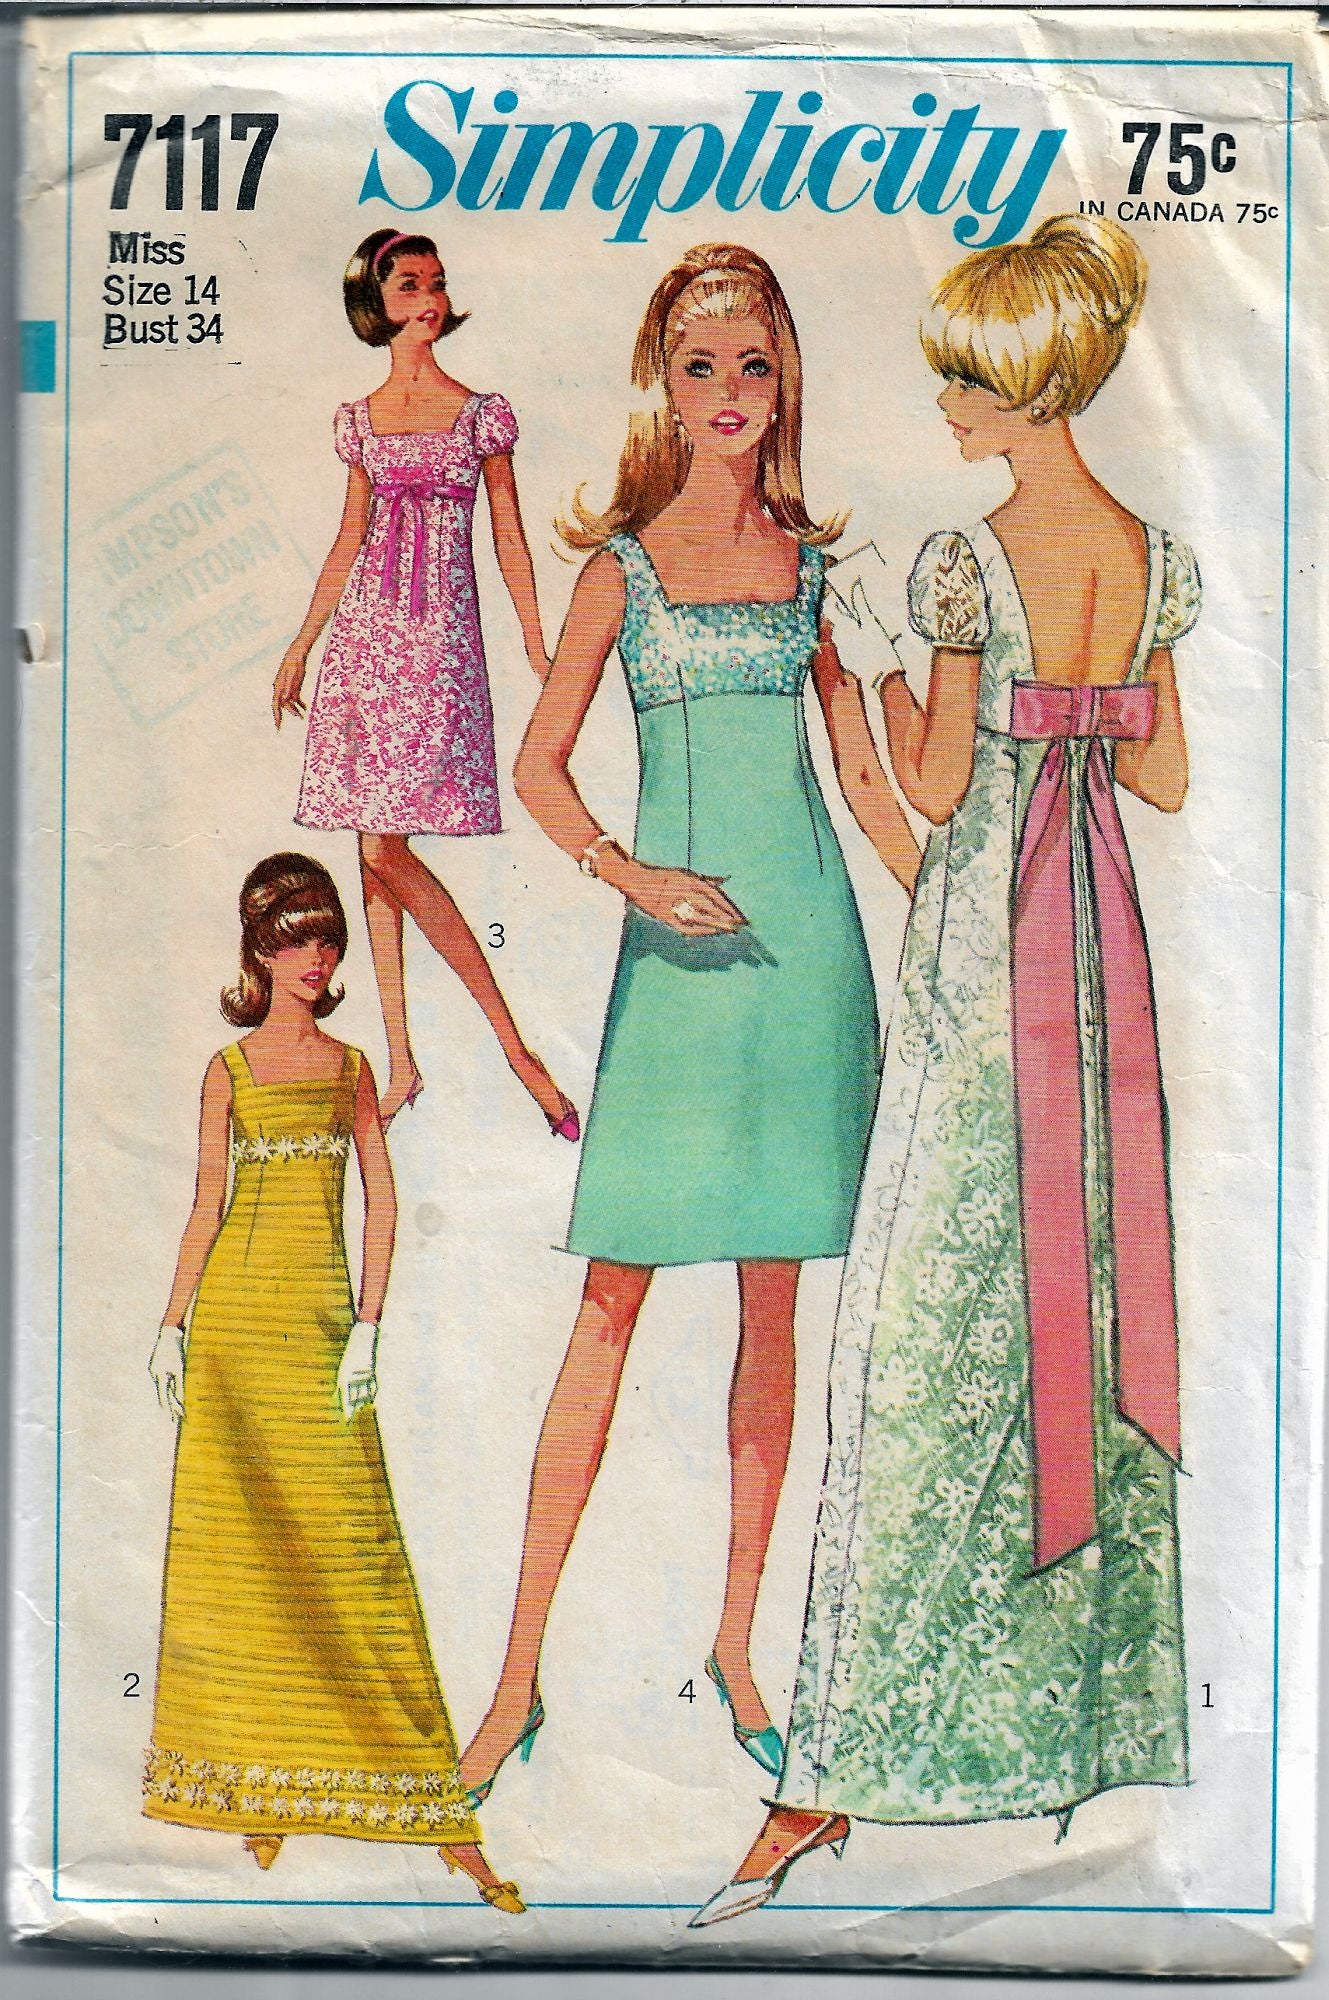 BEAUTIFUL 1960s Evening Dress or Gown Pattern BUTTERICK 5106 Deep V Front  and Back Necklines, Stunning Design Bust 38 Vintage Sewing Pattern FF